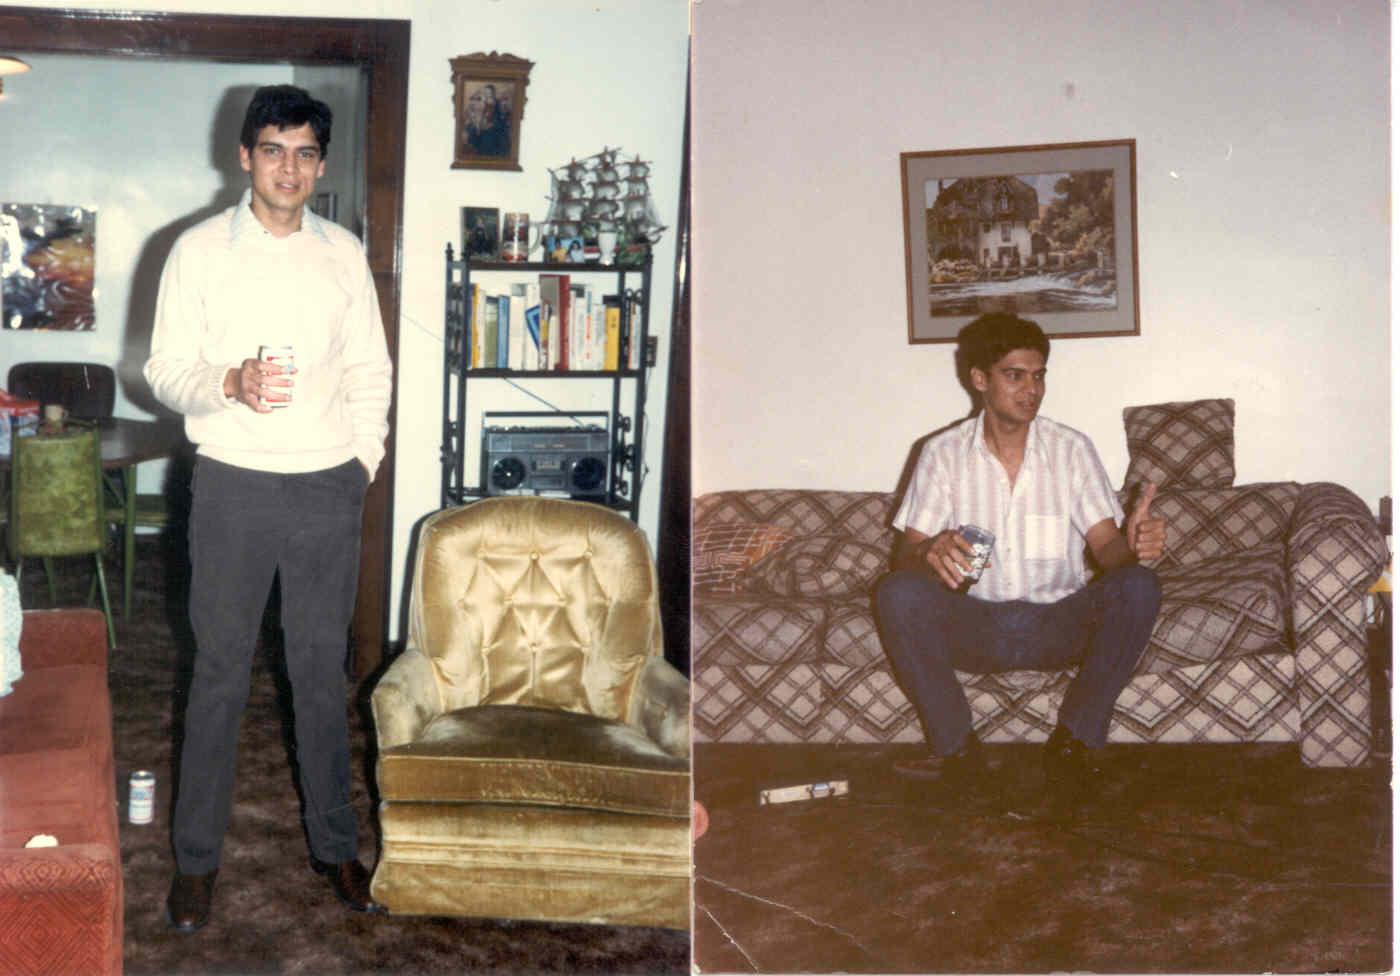 Click to enlarge - Myself at 27 yrs during senior year at the University of Illinois 